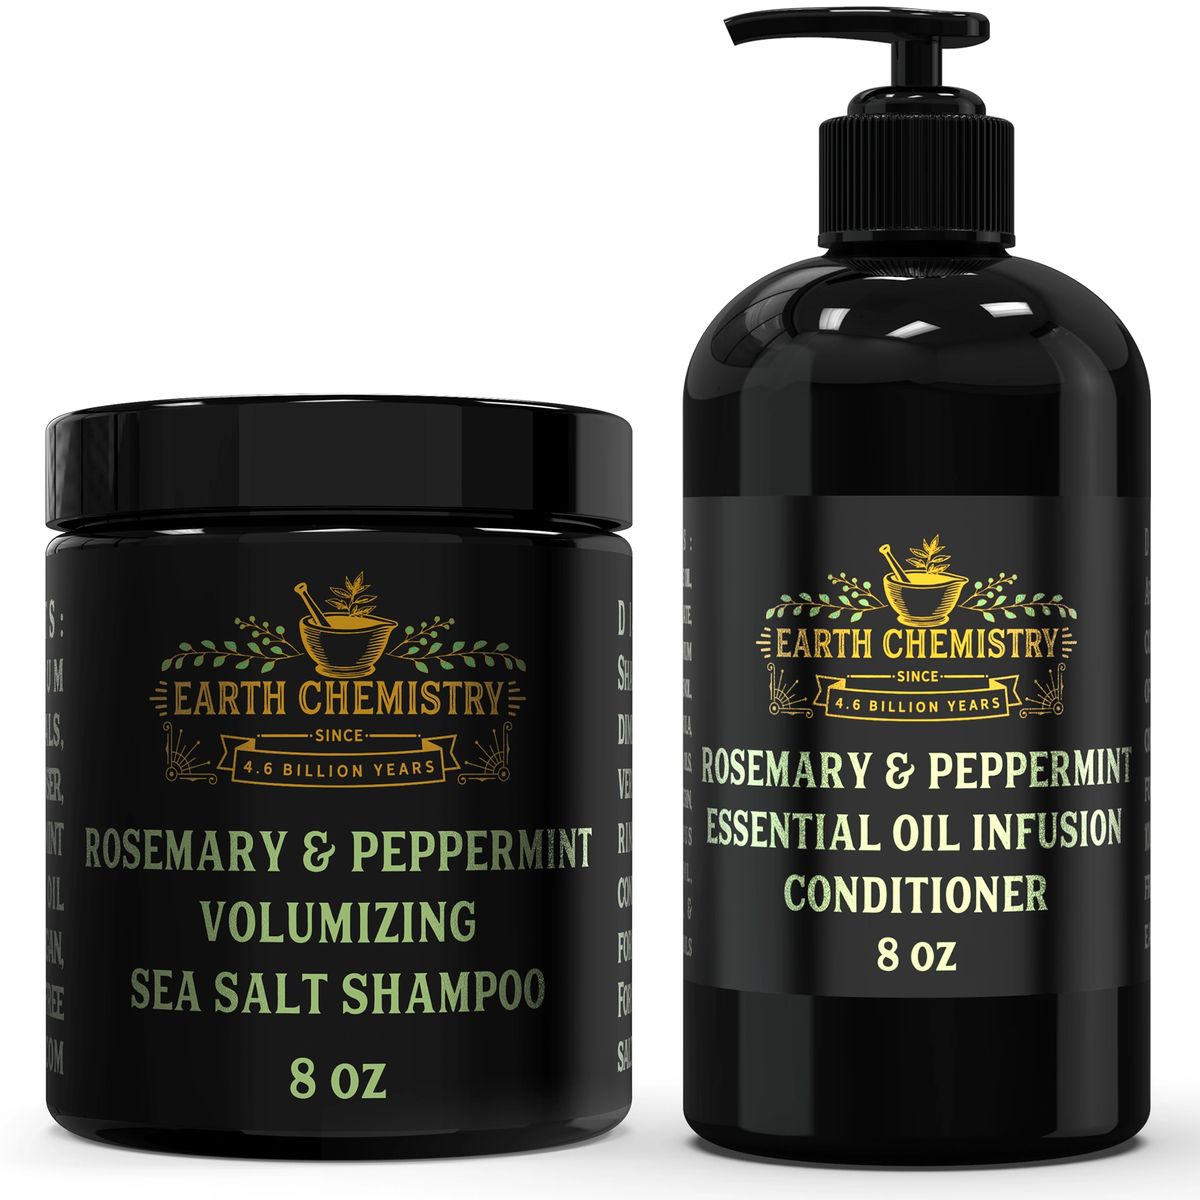 Rosemary & Peppermint Sea & Conditioner 2 Bundle, Volumize and Thicken Thin or Oily Hair, with Organic Essential Oils to Restore Fullness and Shine